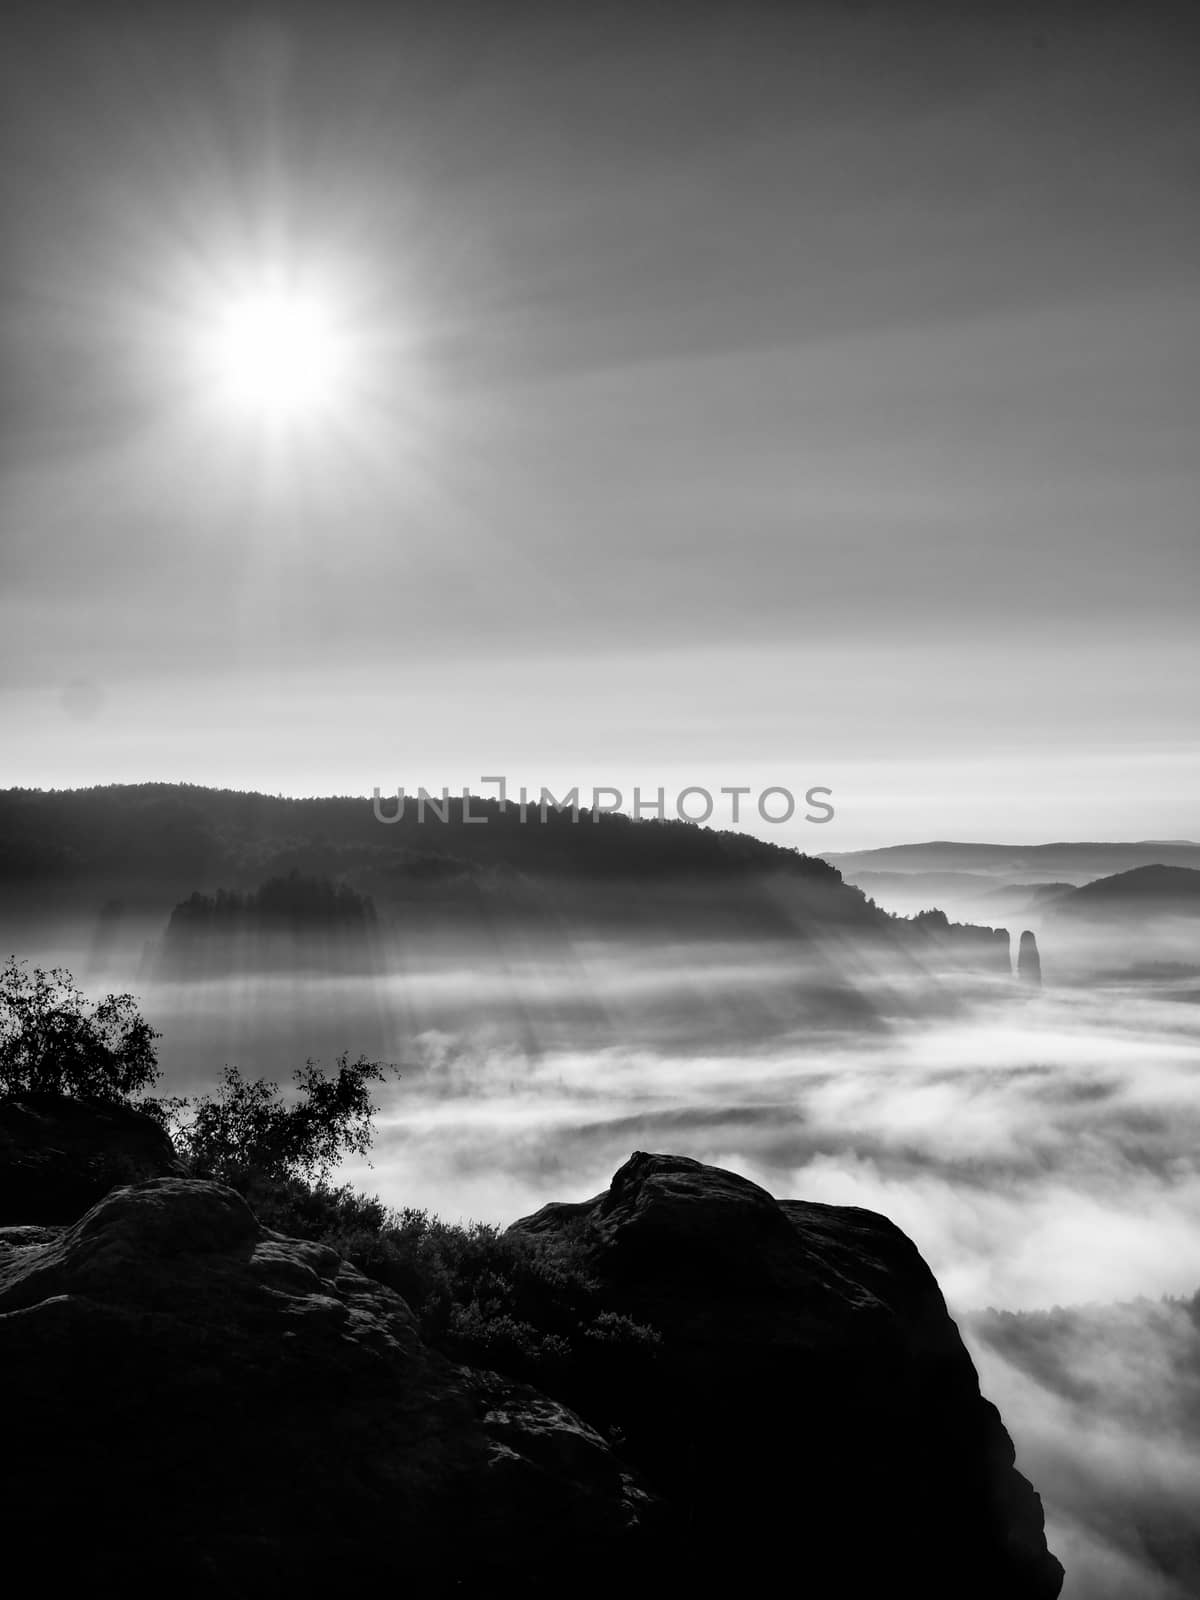 View over sandstone cliff into deep misty valley in Saxony Switzerland. Sandstone peaks increased from foggy background, the fog is orange due to sunrise.